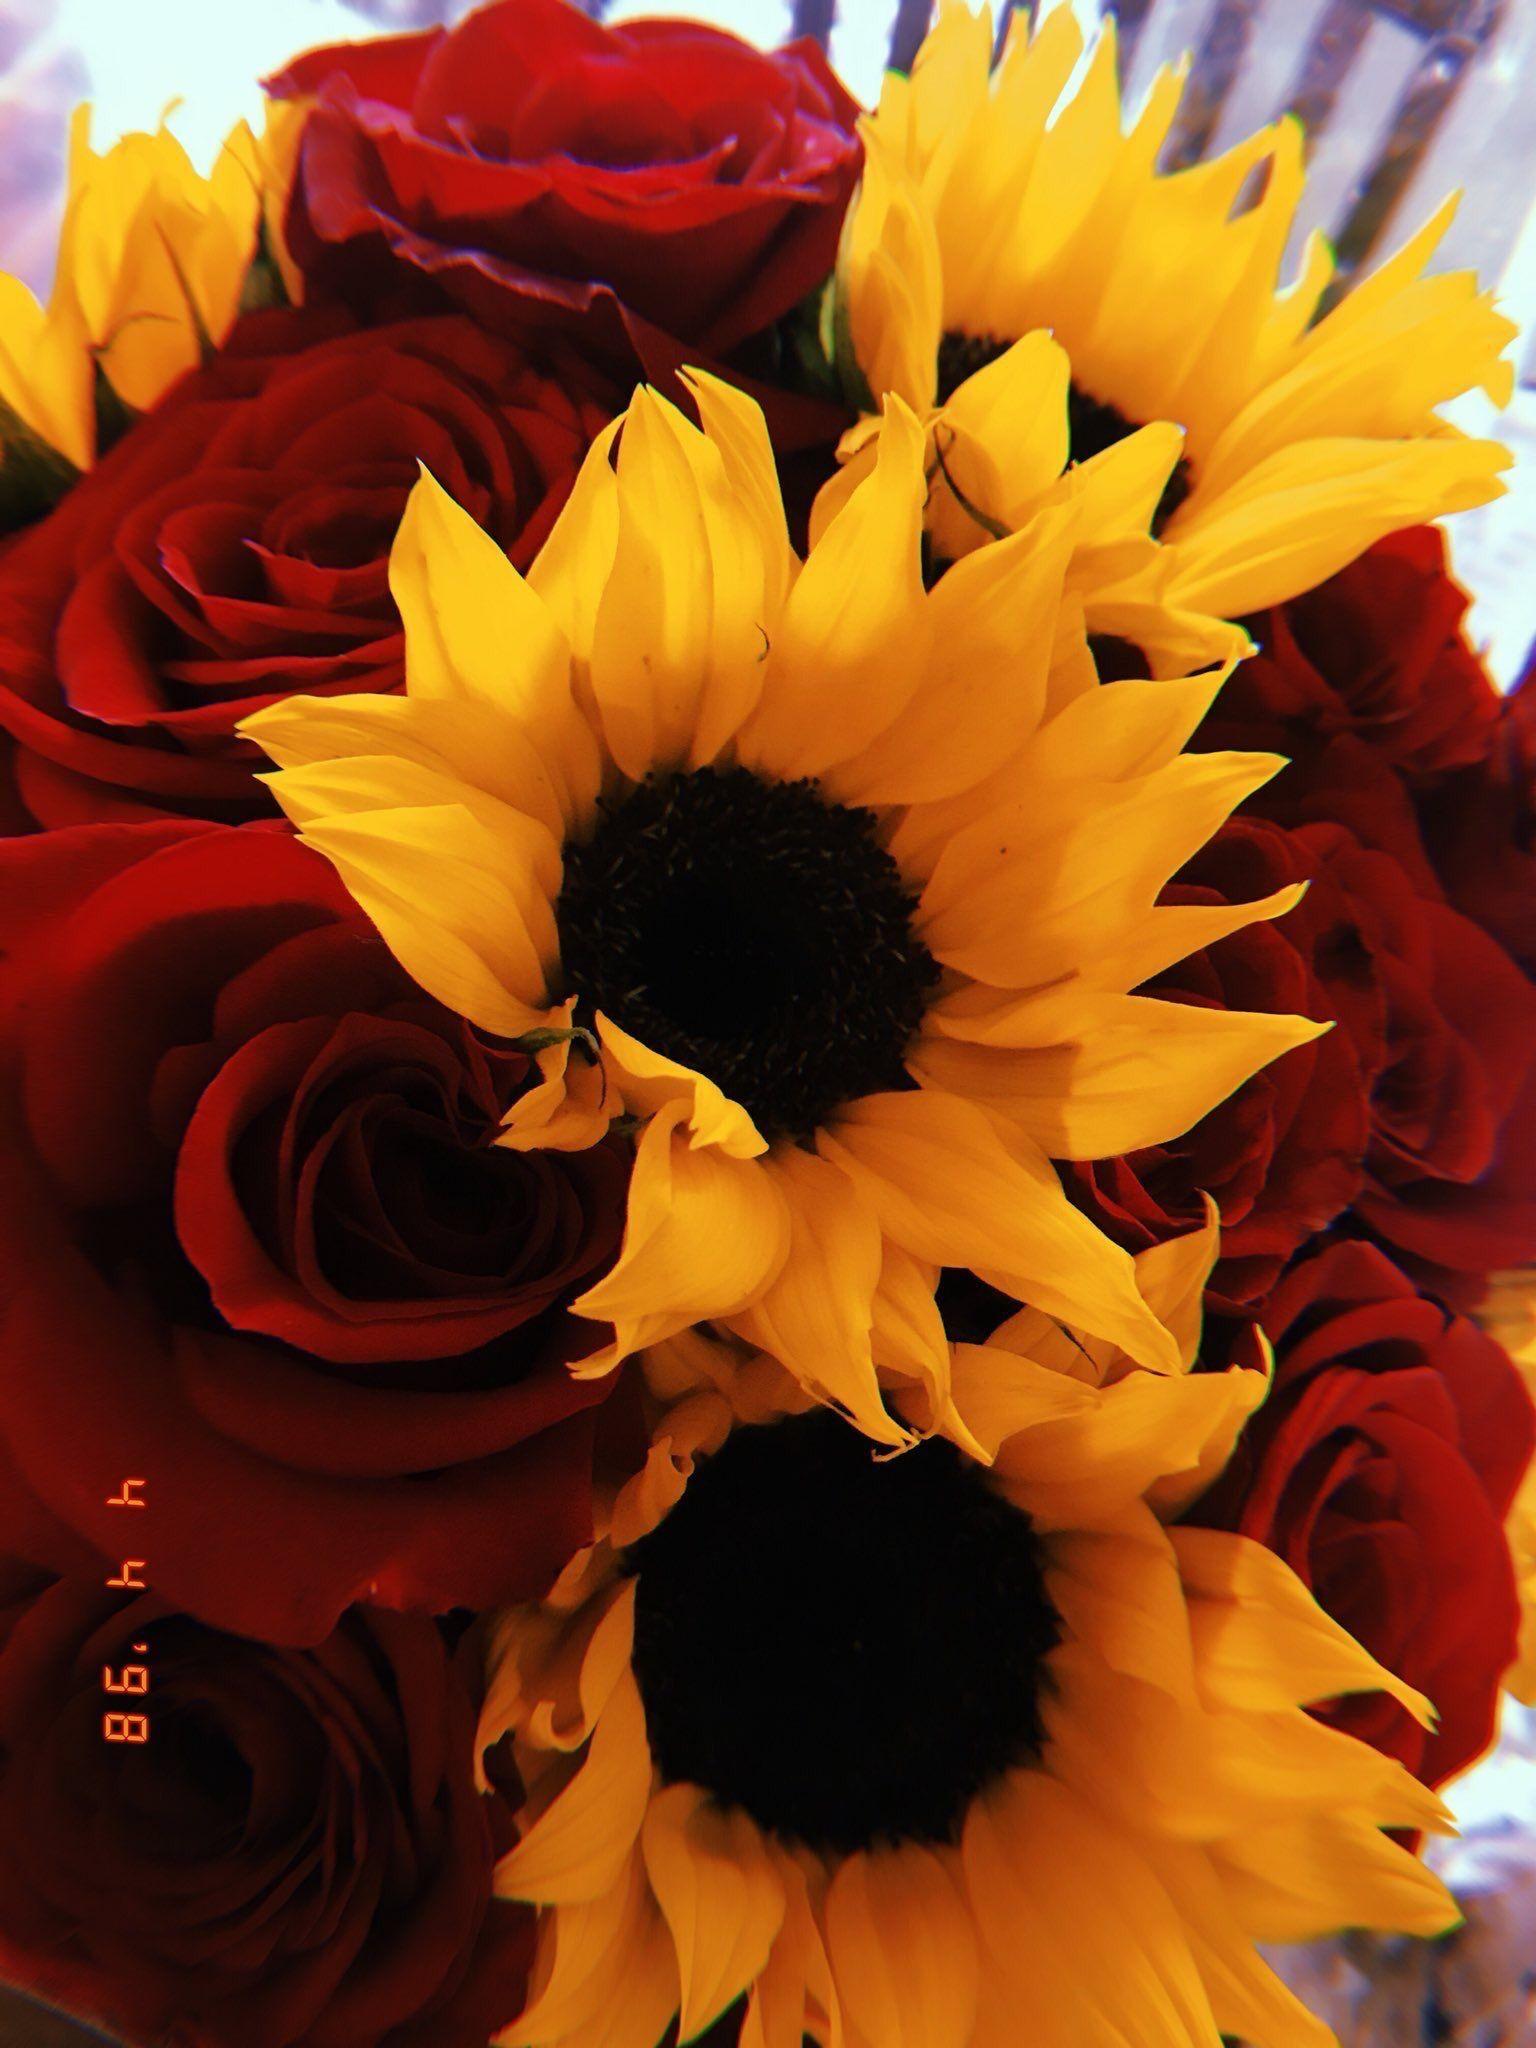 Sunflowers and Red Roses